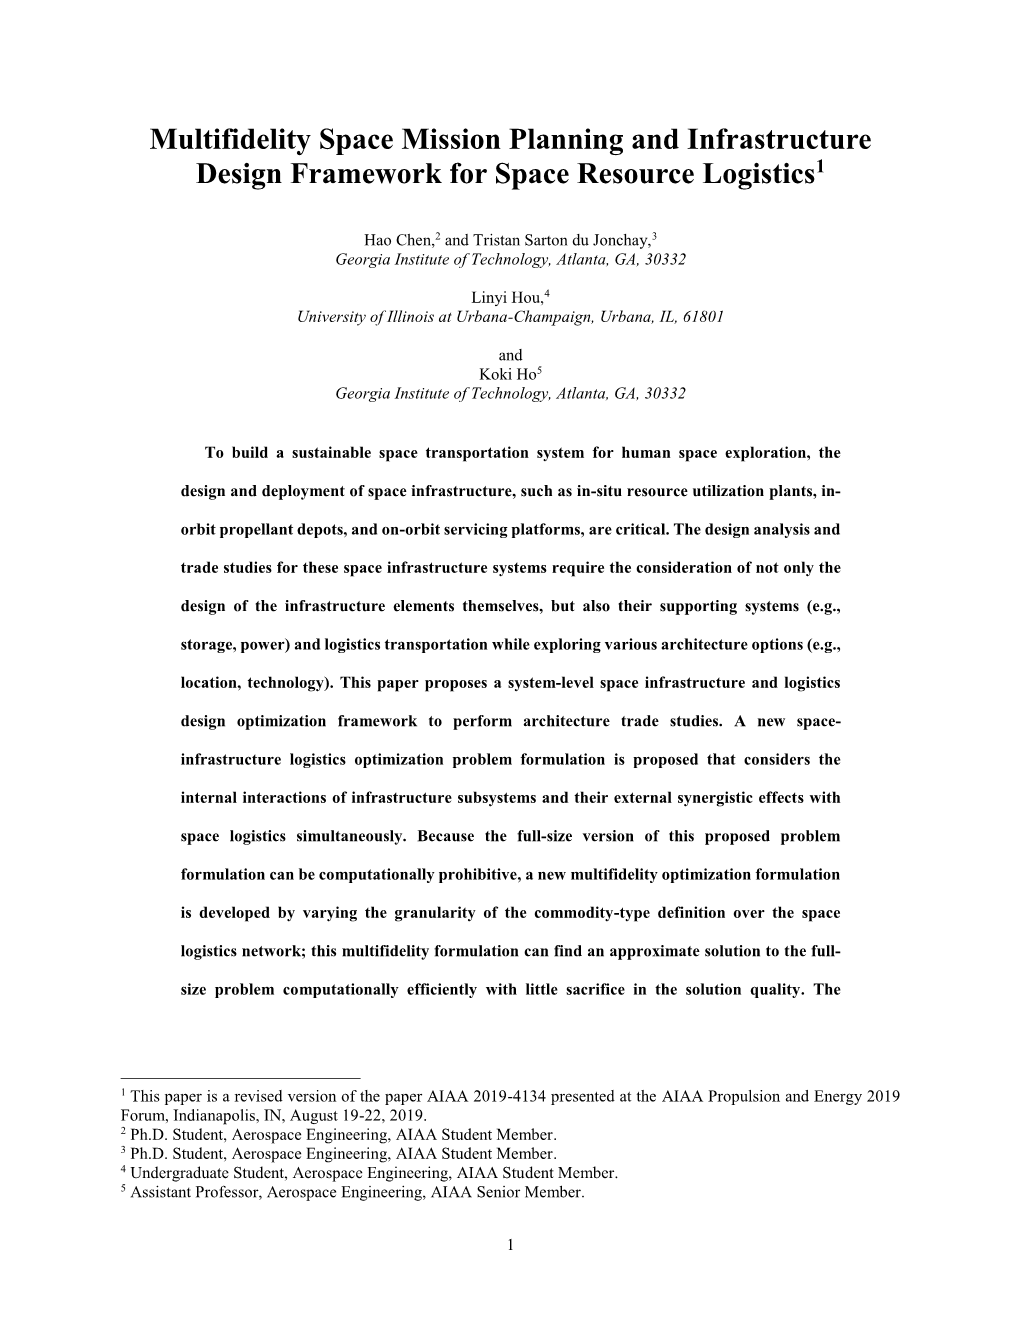 Multifidelity Space Mission Planning and Infrastructure Design Framework for Space Resource Logistics1